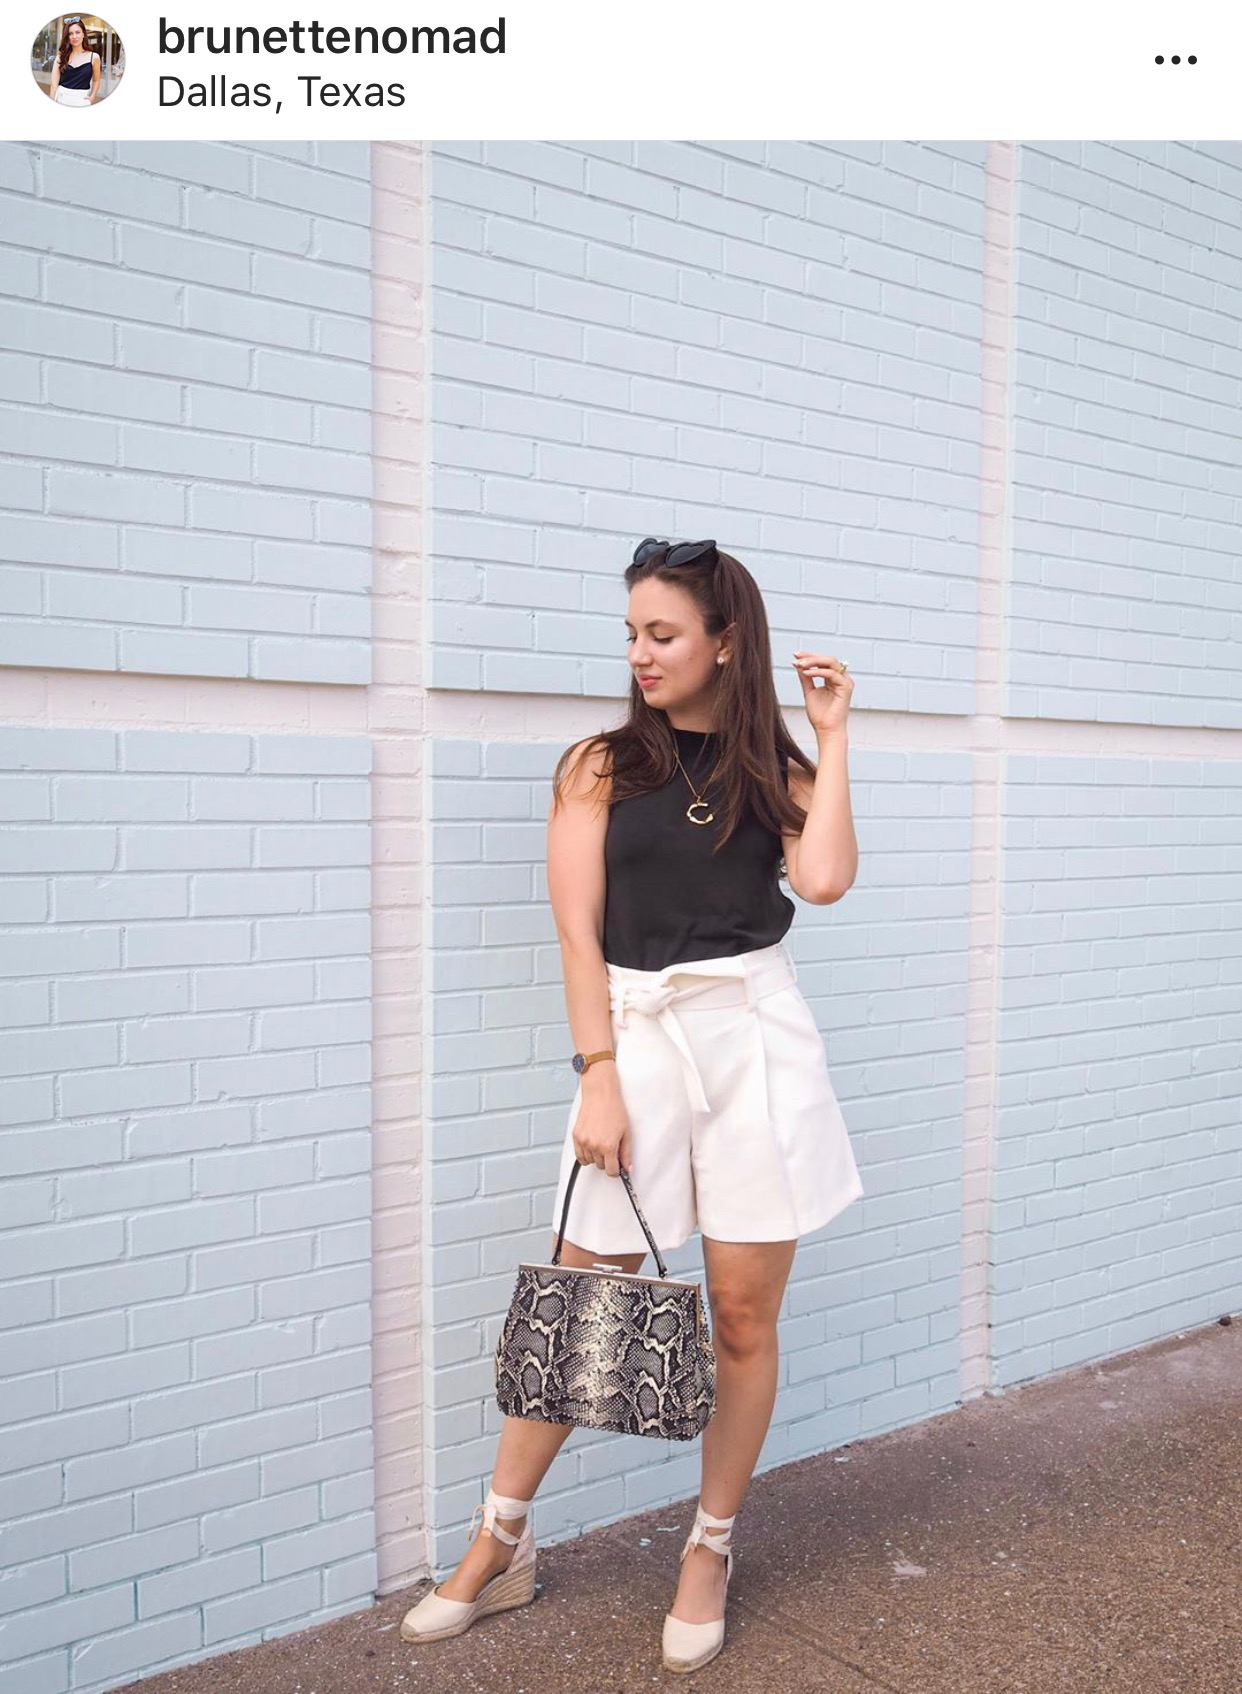 Dallas fashion blogger shares her May Instagram recap and how you can recreate her looks